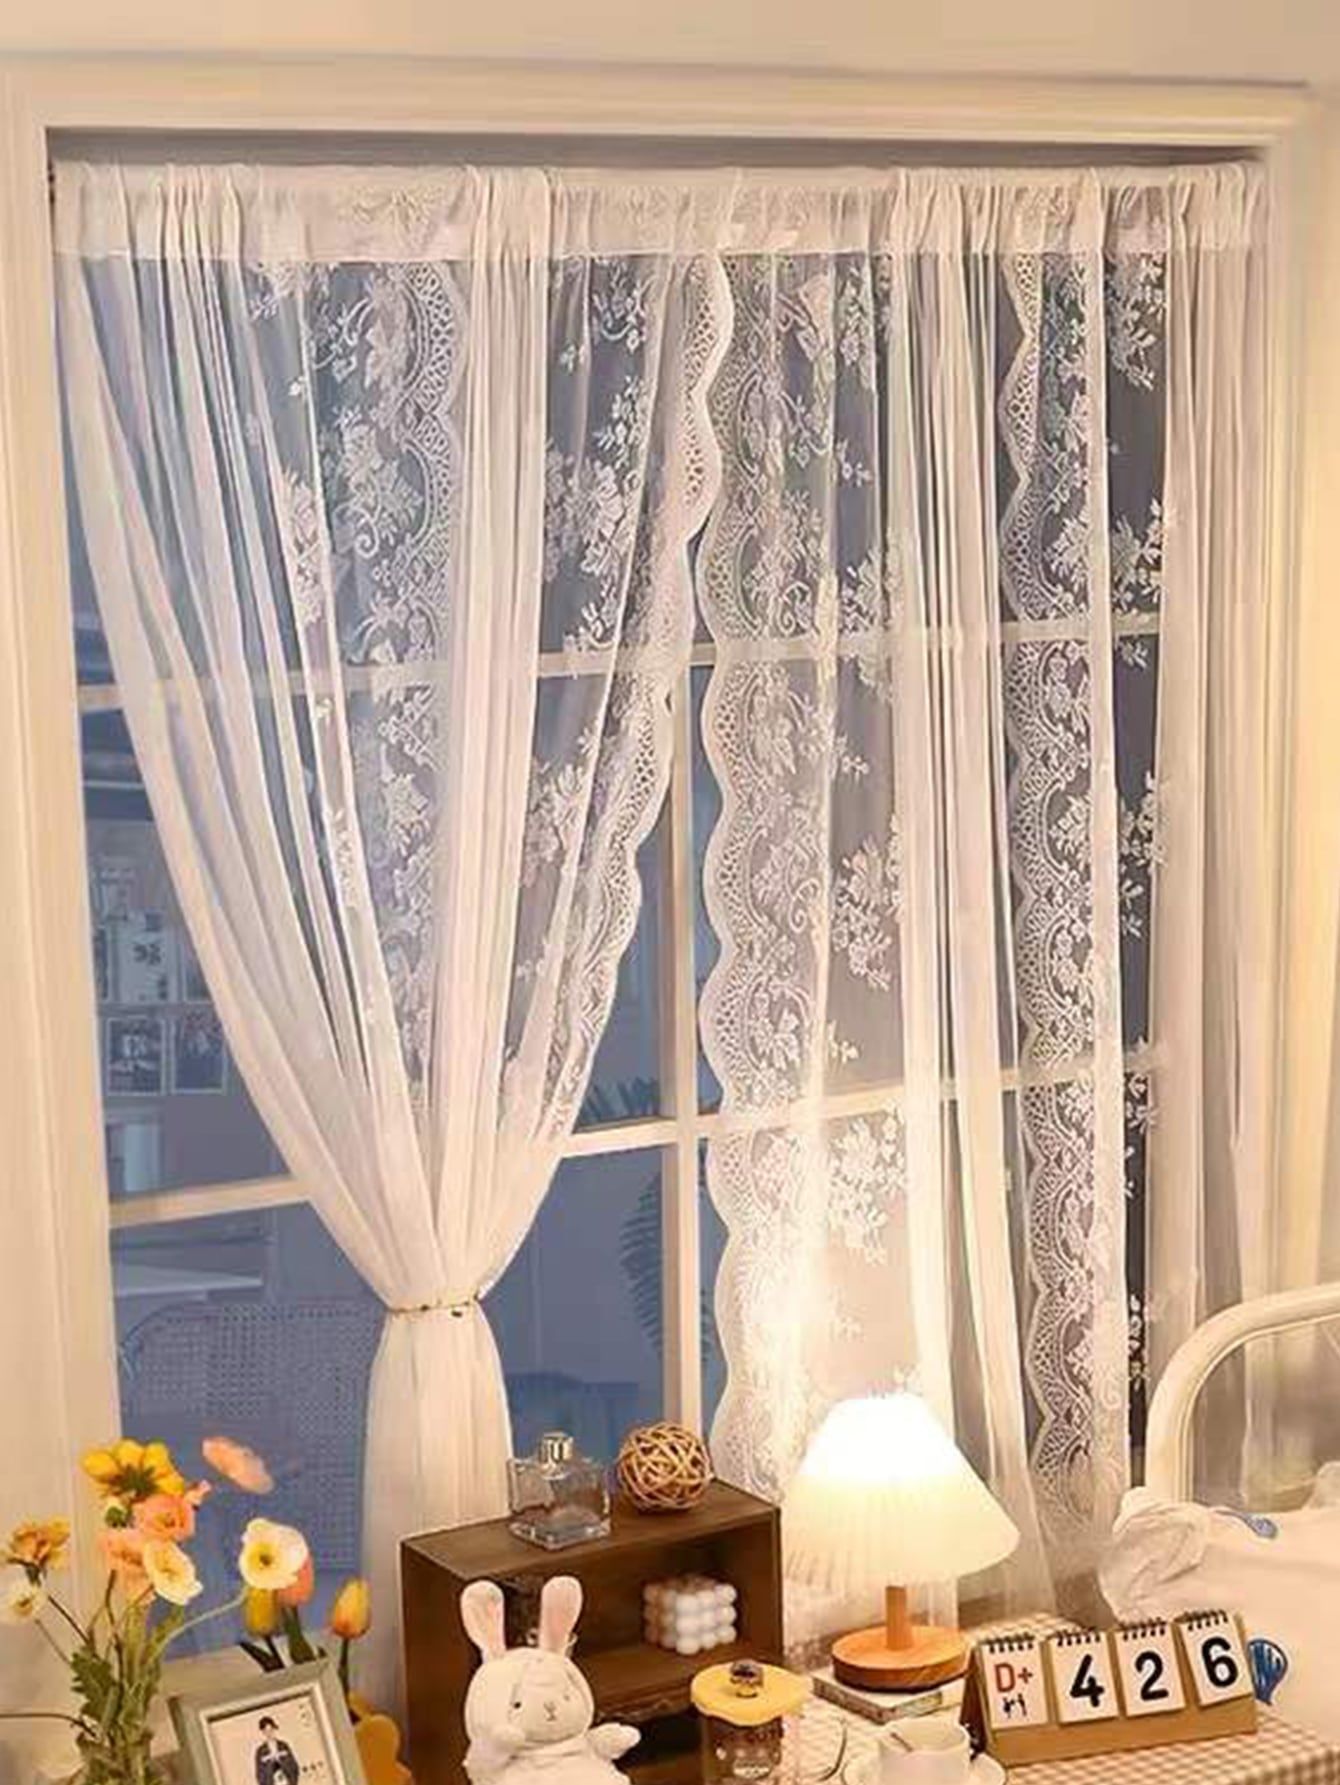 Adding a Touch of Romance: Lace Curtains for Elegant Home Décor